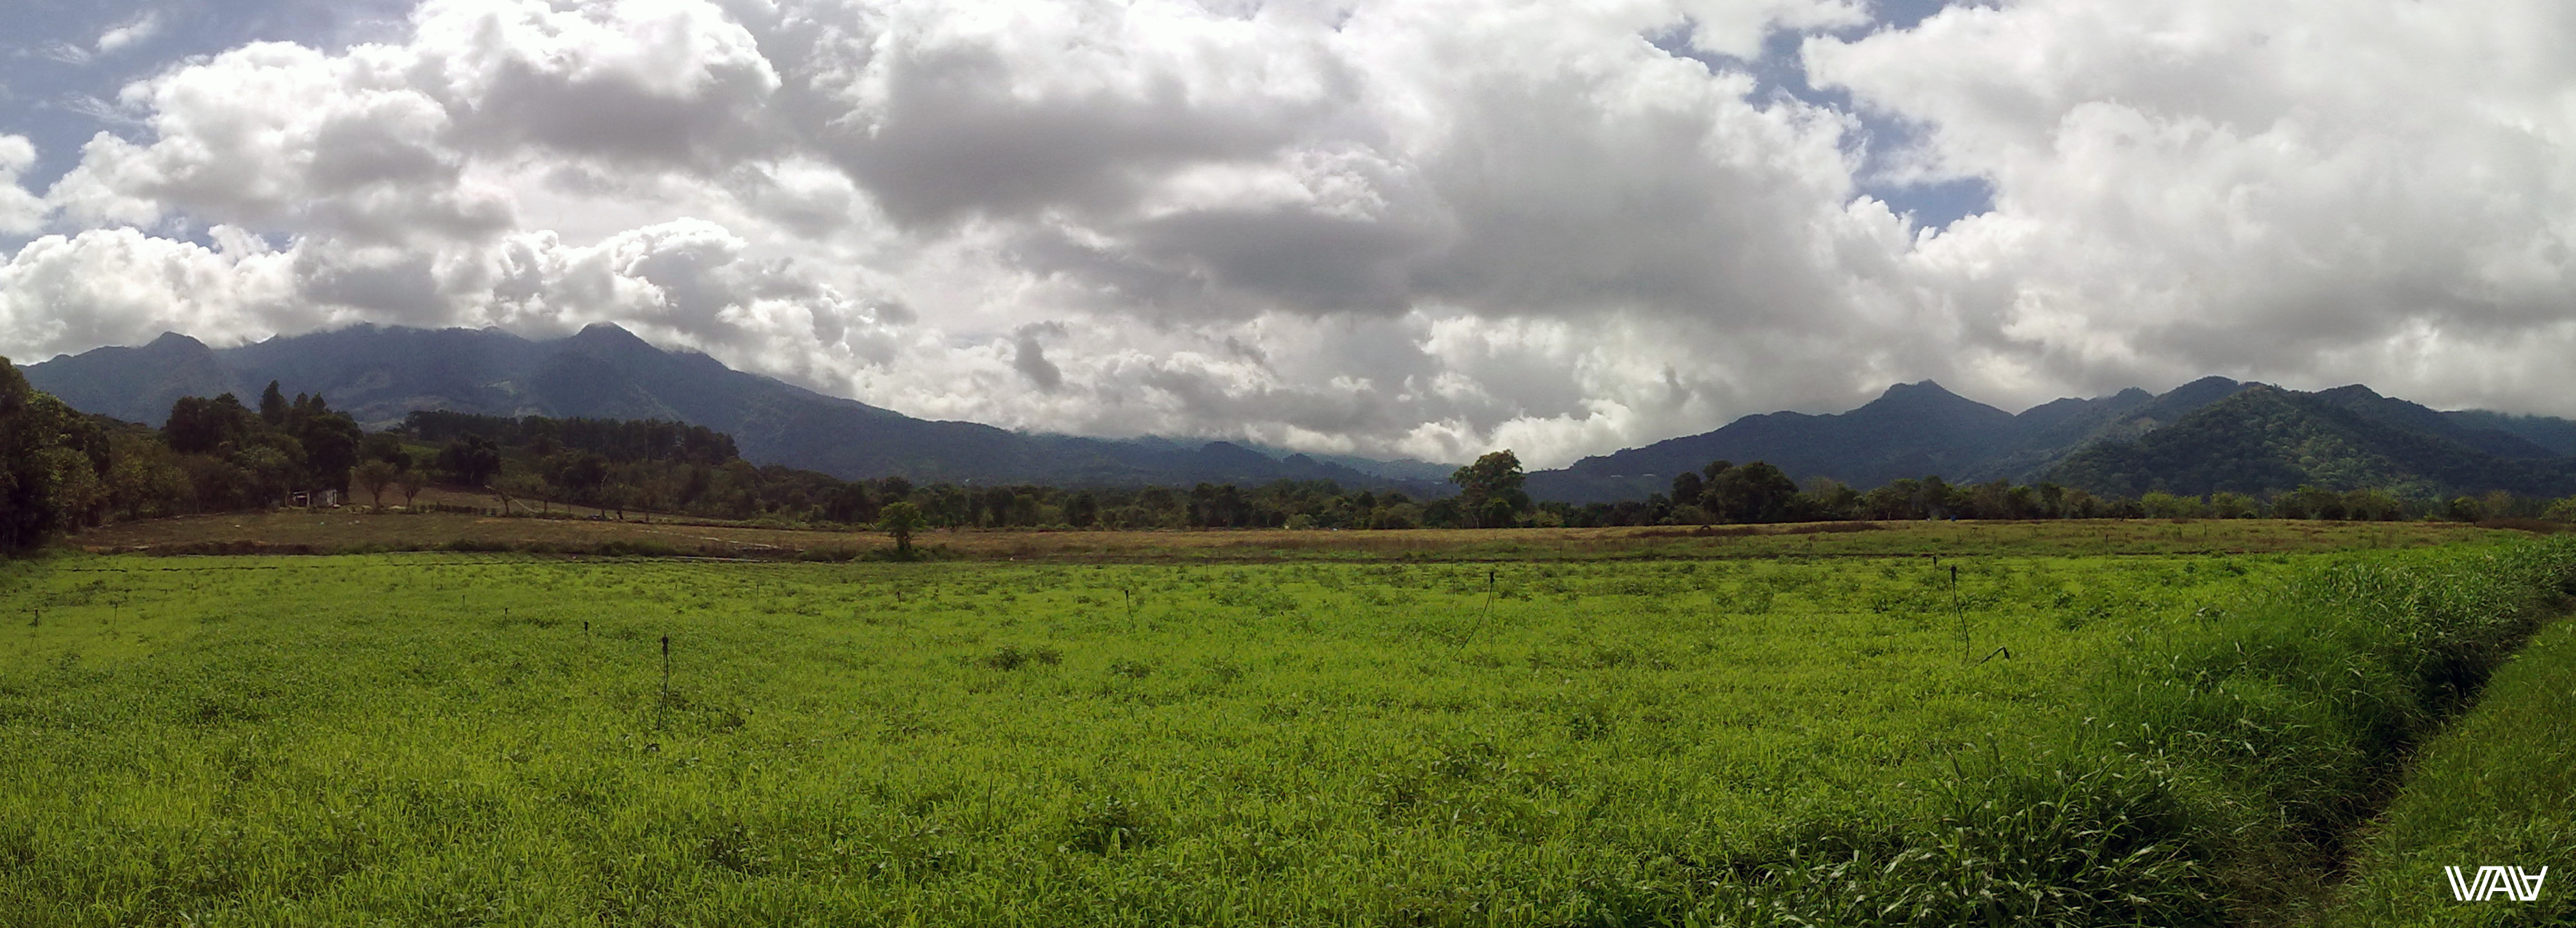 Local scenery with field and mountains. Bajo Boquete, Panama